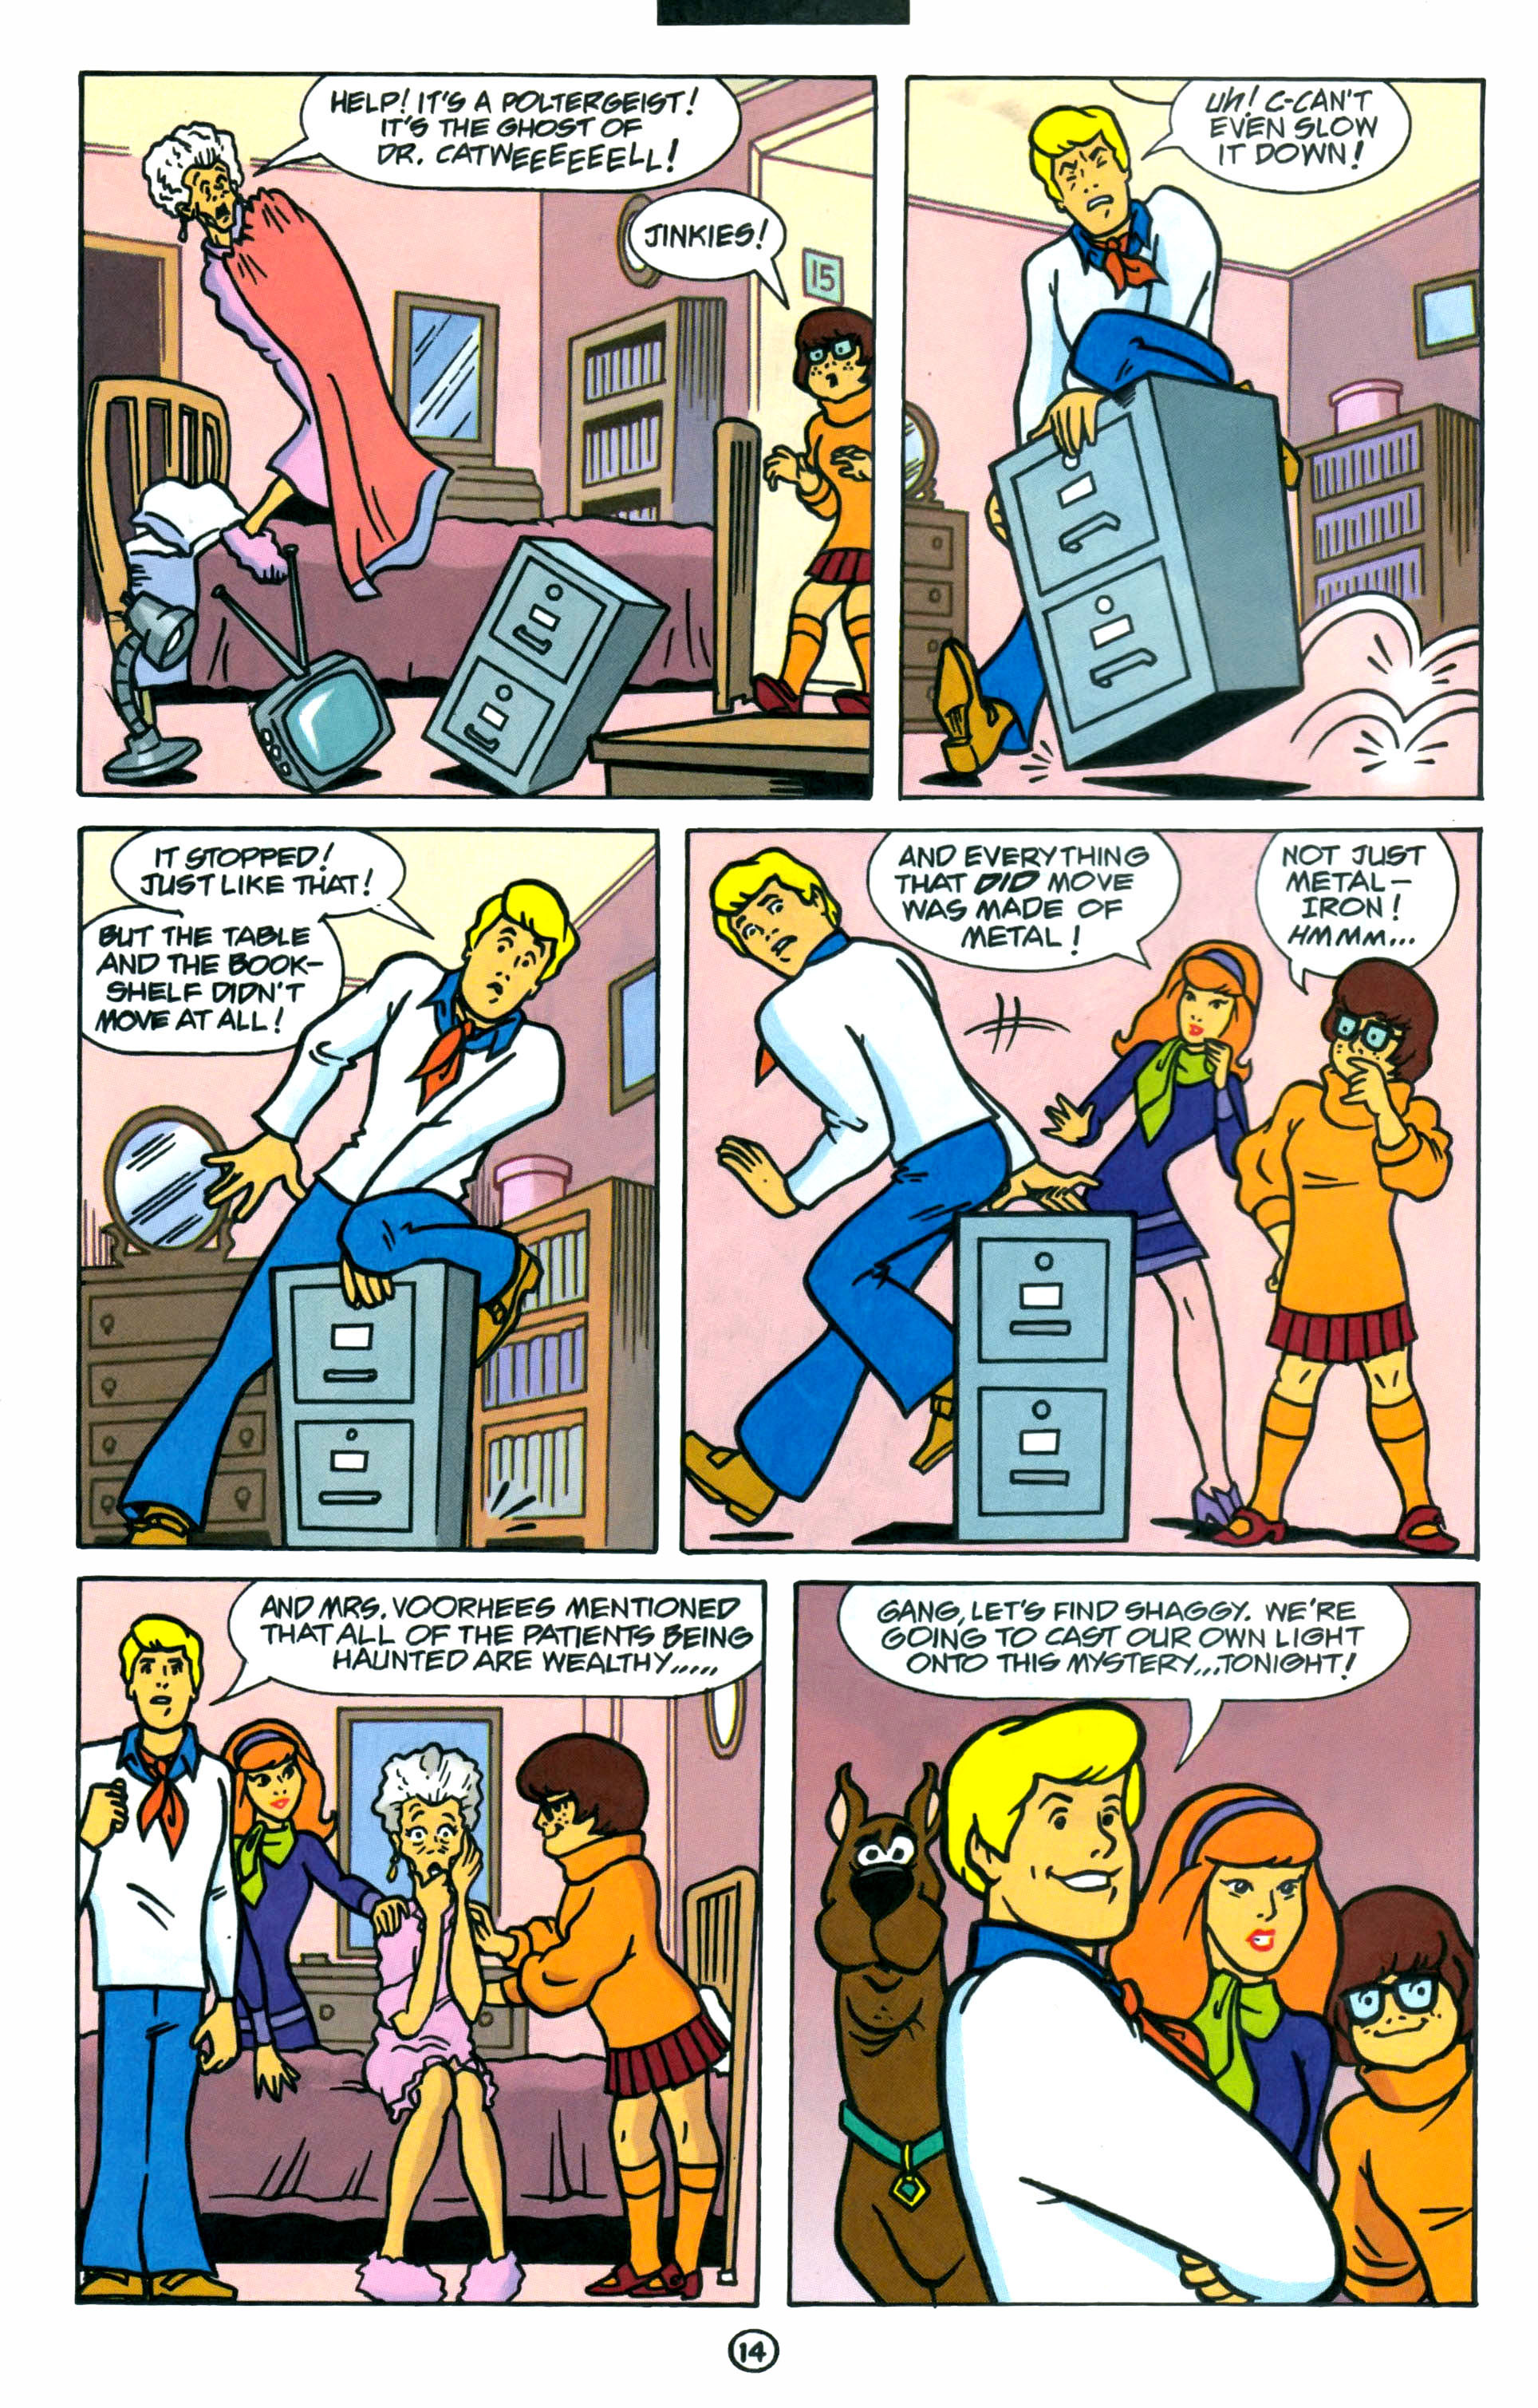 Scooby Doo 1997 Issue 1 Read Scooby Doo 1997 Issue 1 Comic Online In